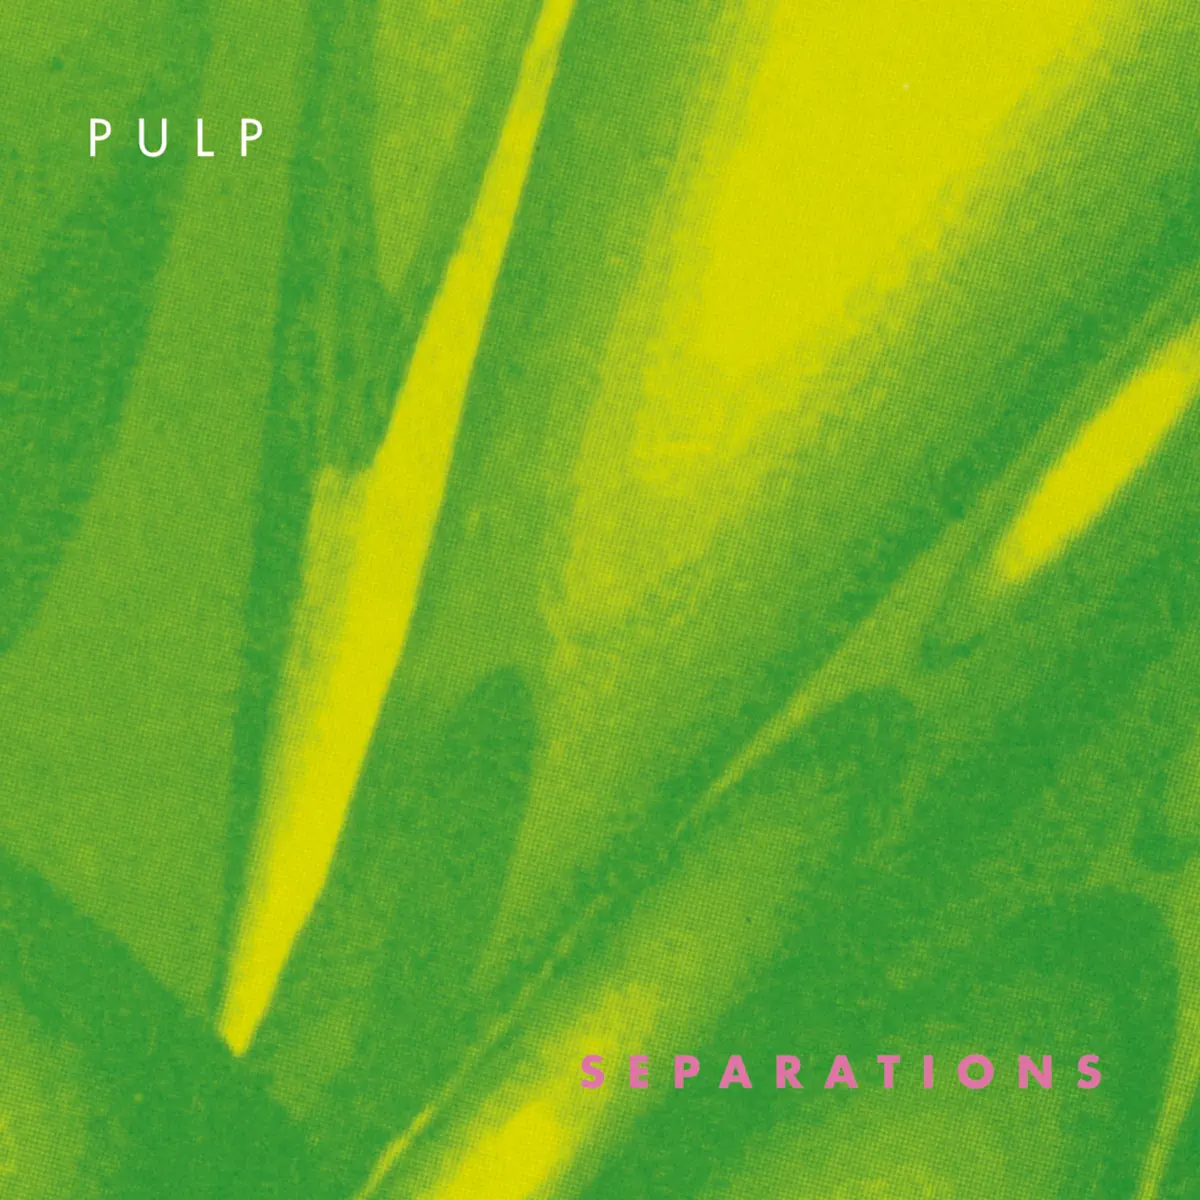 Pulp - Separations (Remastered) (1992) [iTunes Plus AAC M4A]-新房子